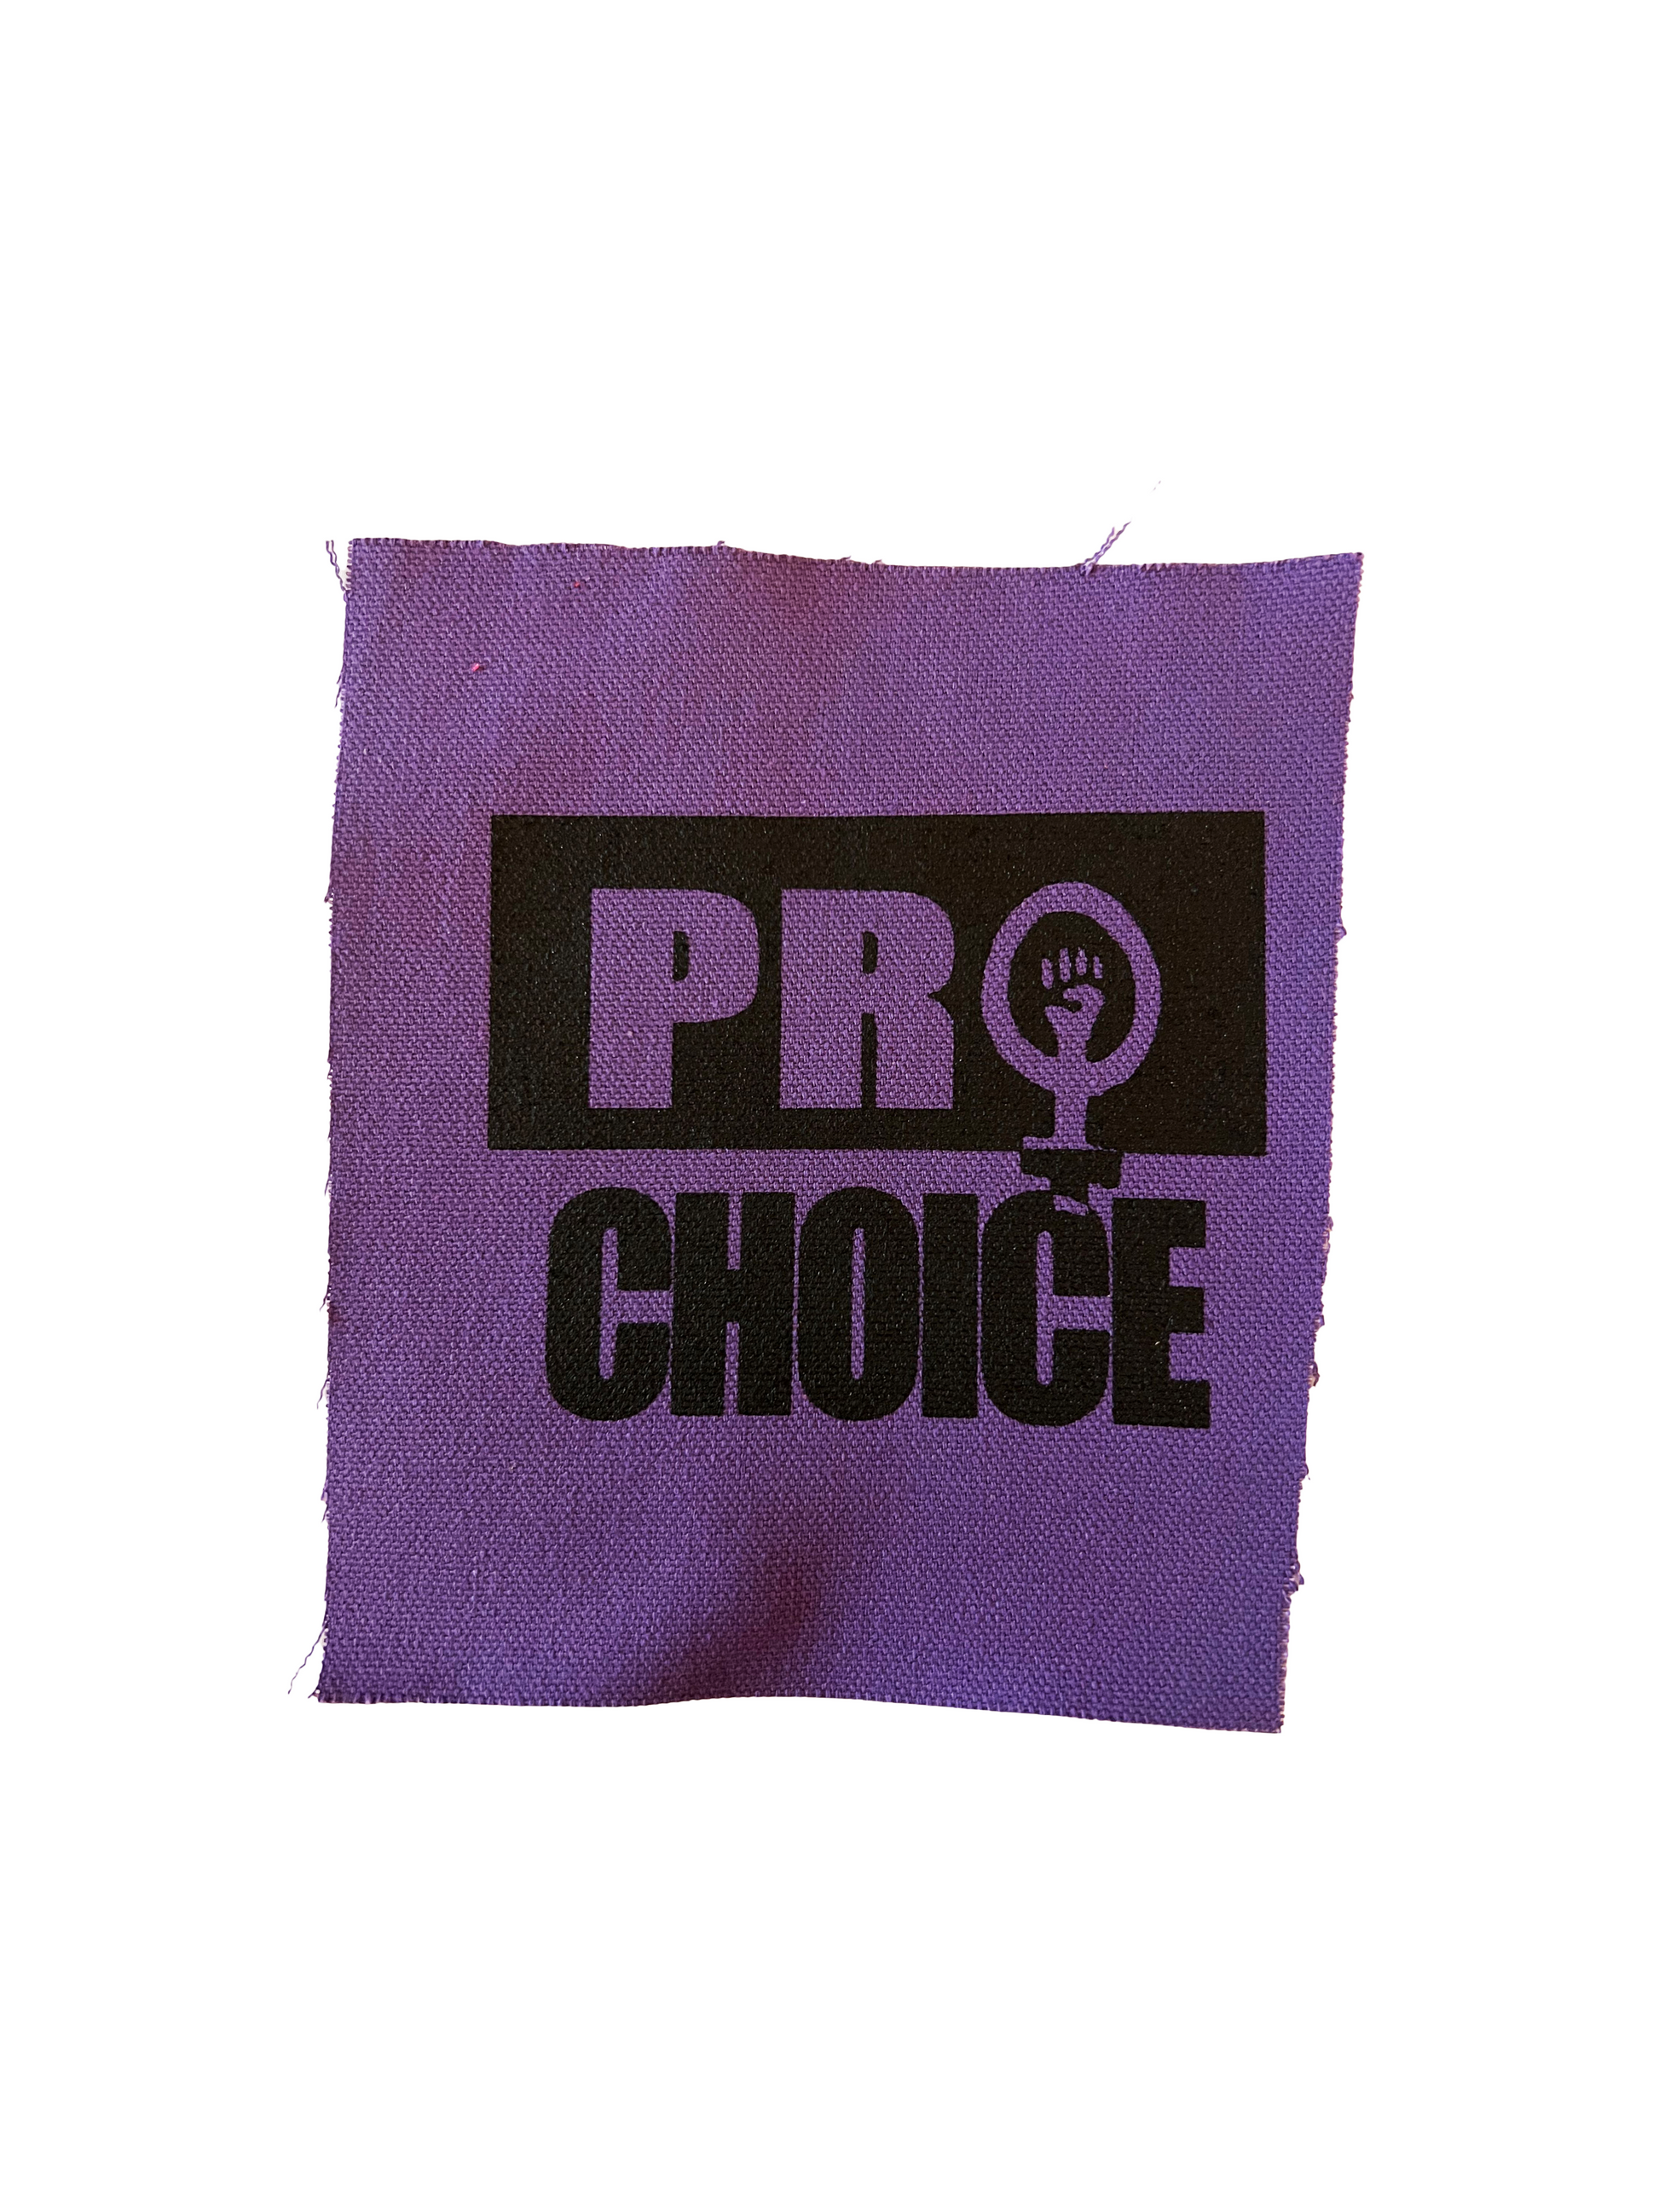 Microcosm Pro Choice Patch in Purple